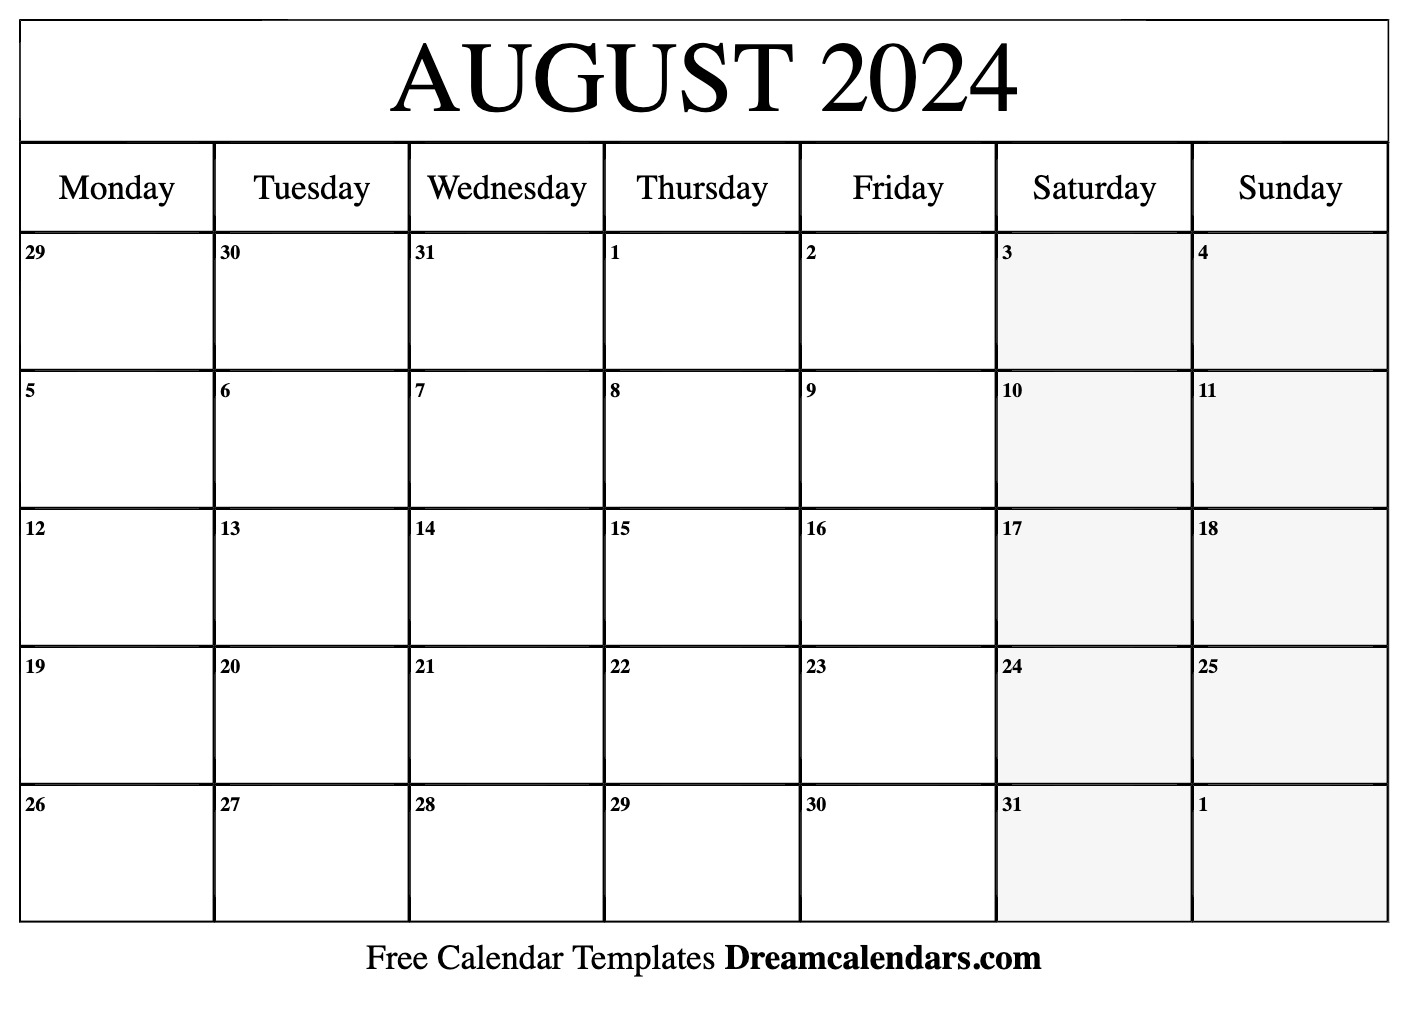 August 2024 Calendar Free Printable with Holidays and Observances